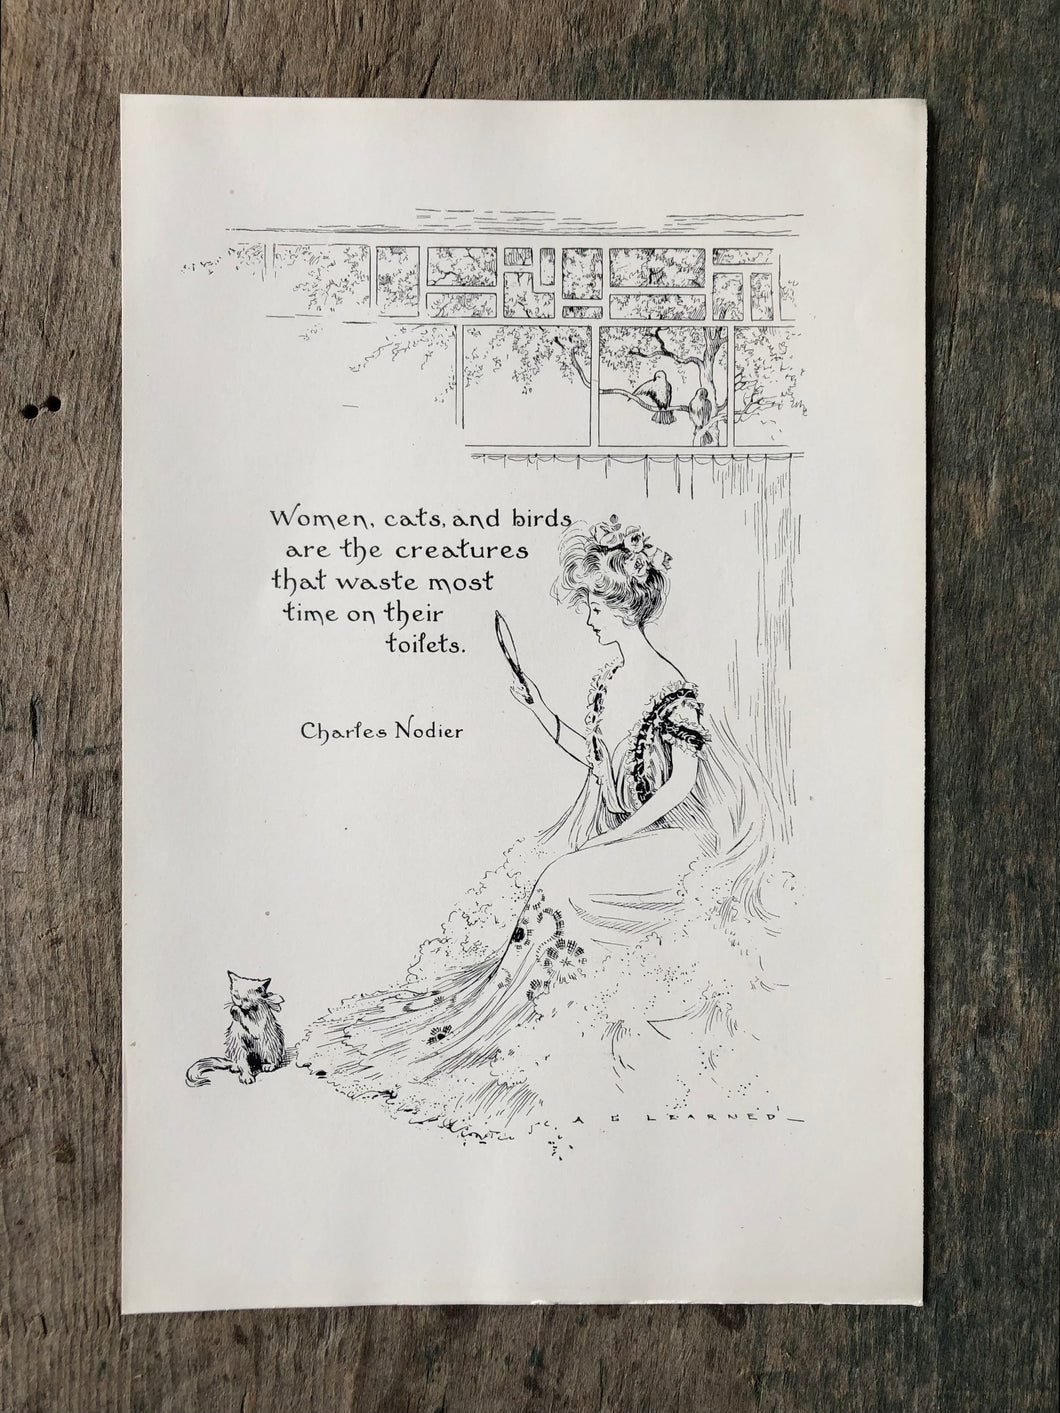 Charles Nodier Quote Print illustrated by Arthur G. Learned from “Eve’s Daughter”